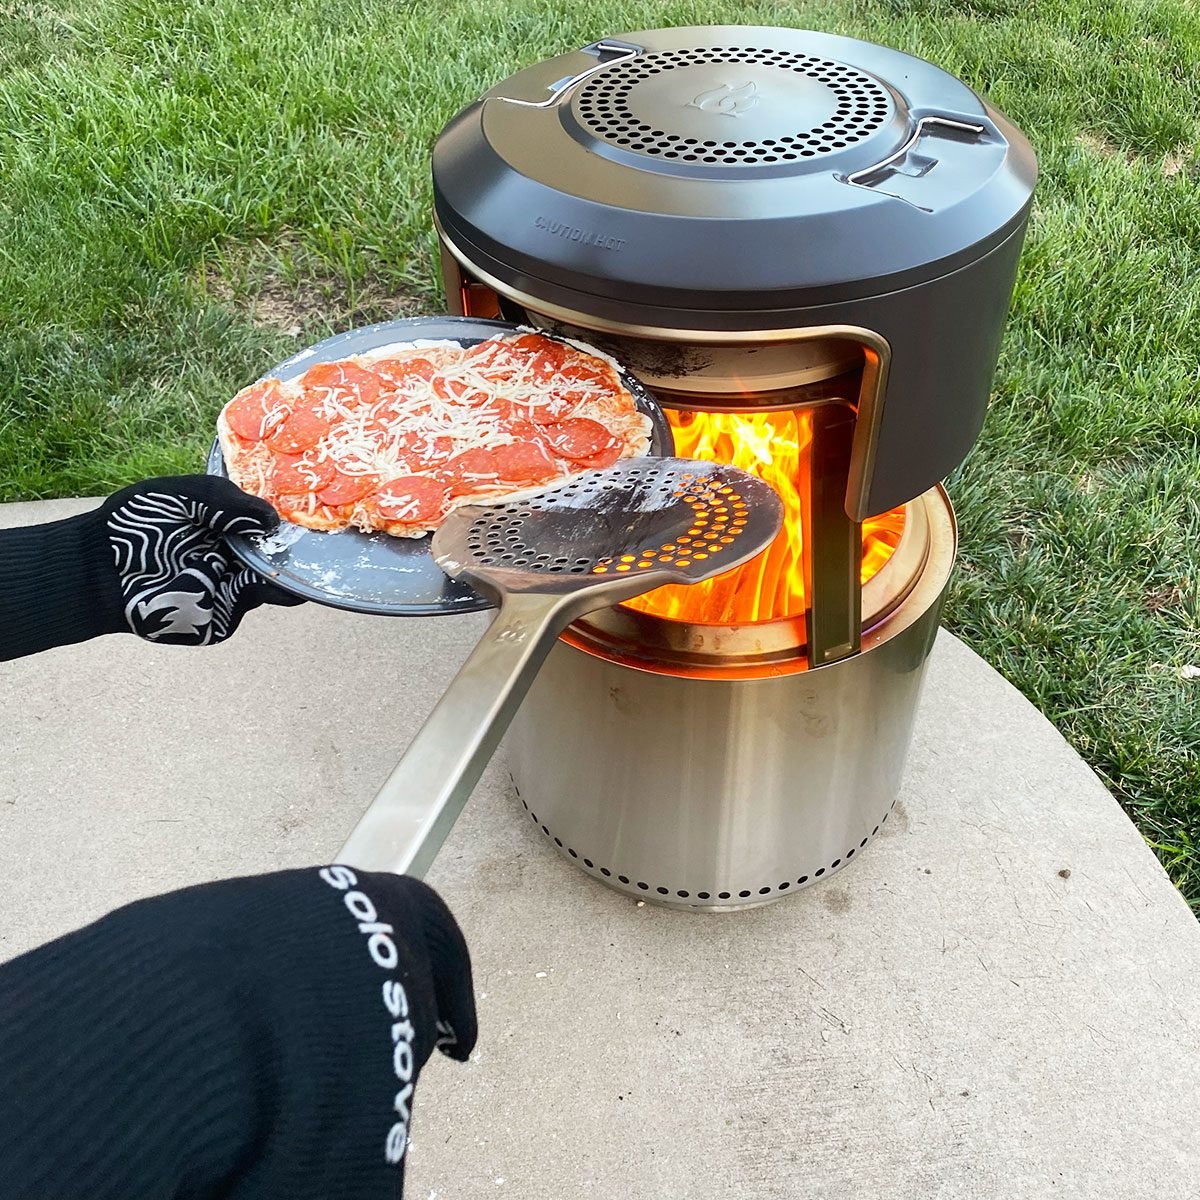 10 Solo Stove Accessories to Make the Most of Your Fire Pit, Tested